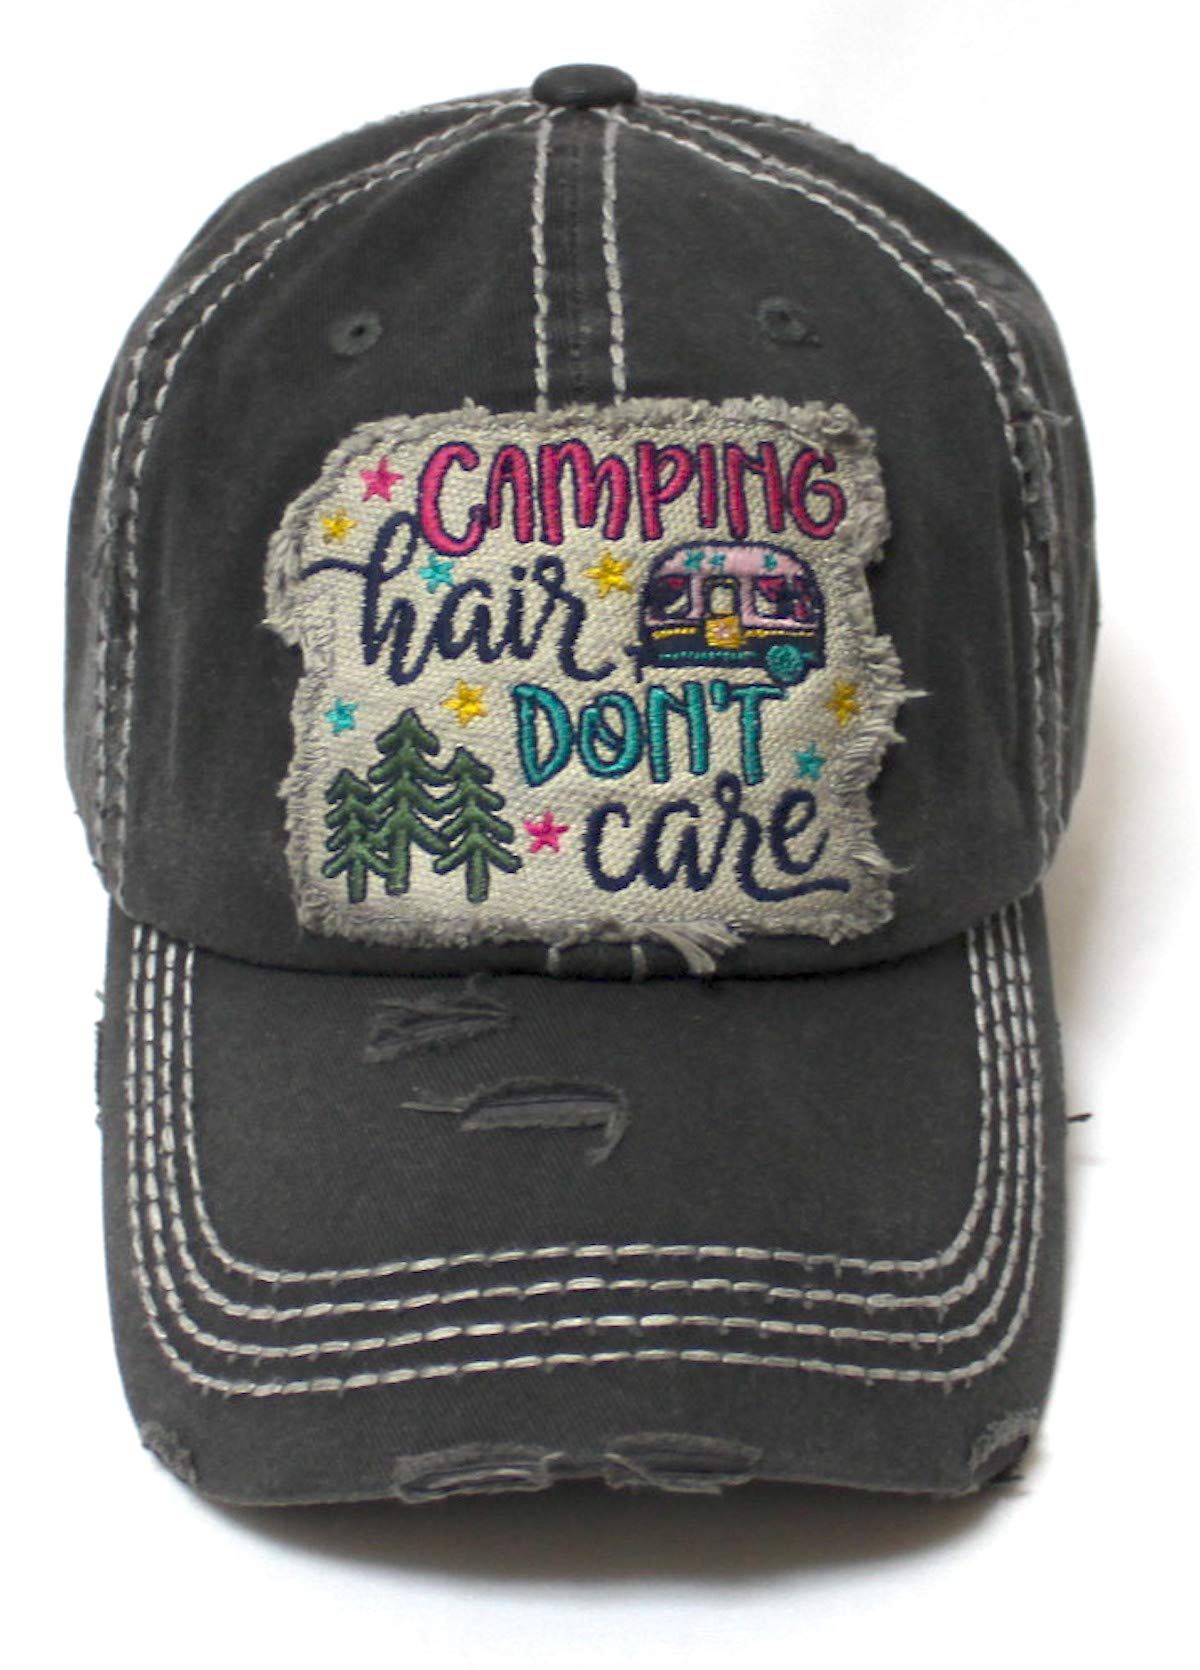 CAPS 'N VINTAGE Women's Baseball Cap Camping Hair Don't Care Patch Embroidery Monogram Hat, Charcoal Black - Caps 'N Vintage 